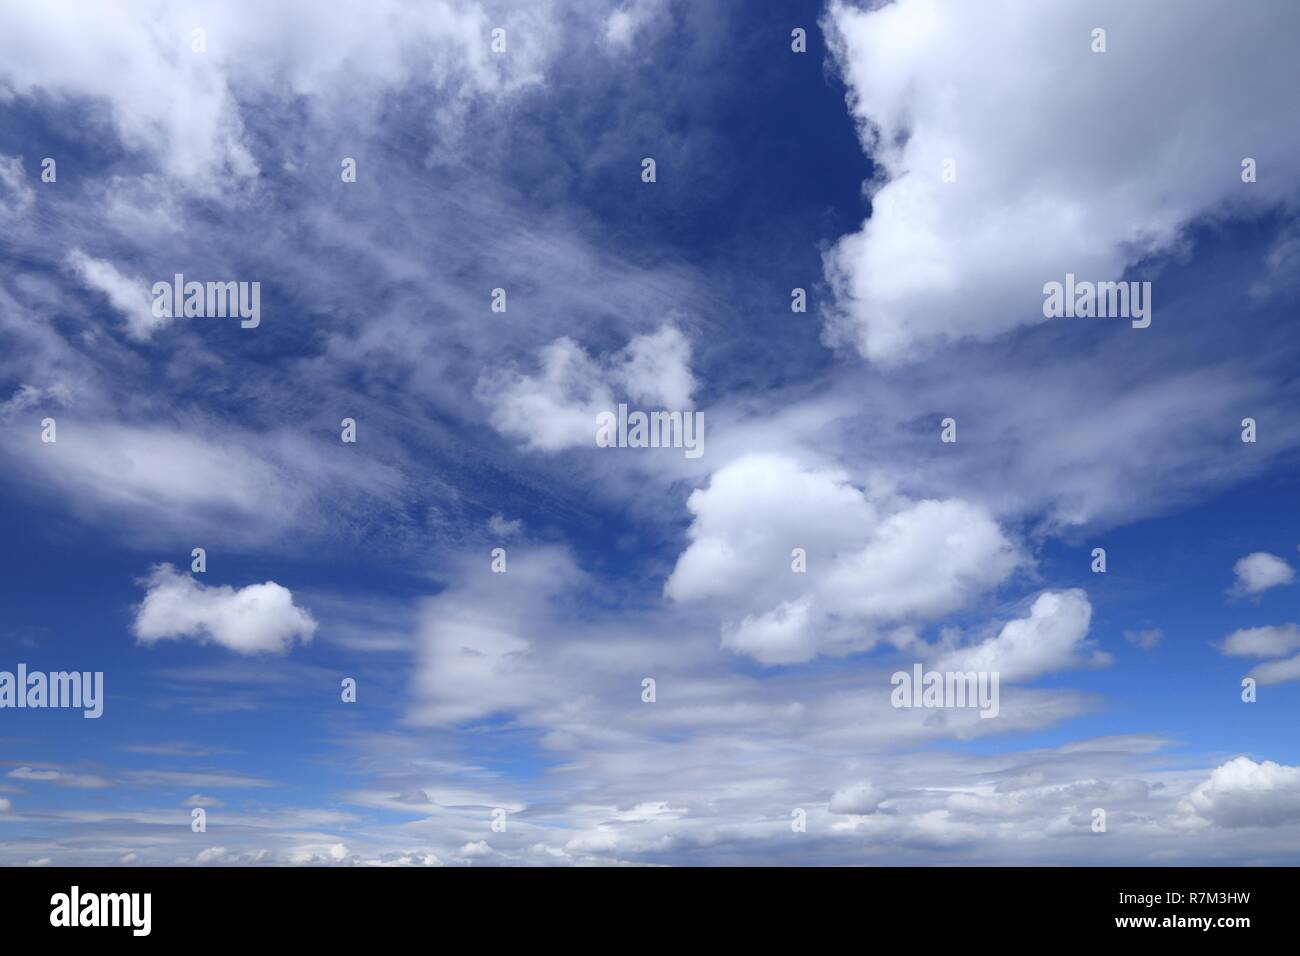 White fluffy clouds on blue sky. Idyllic background abstract. Stock Photo